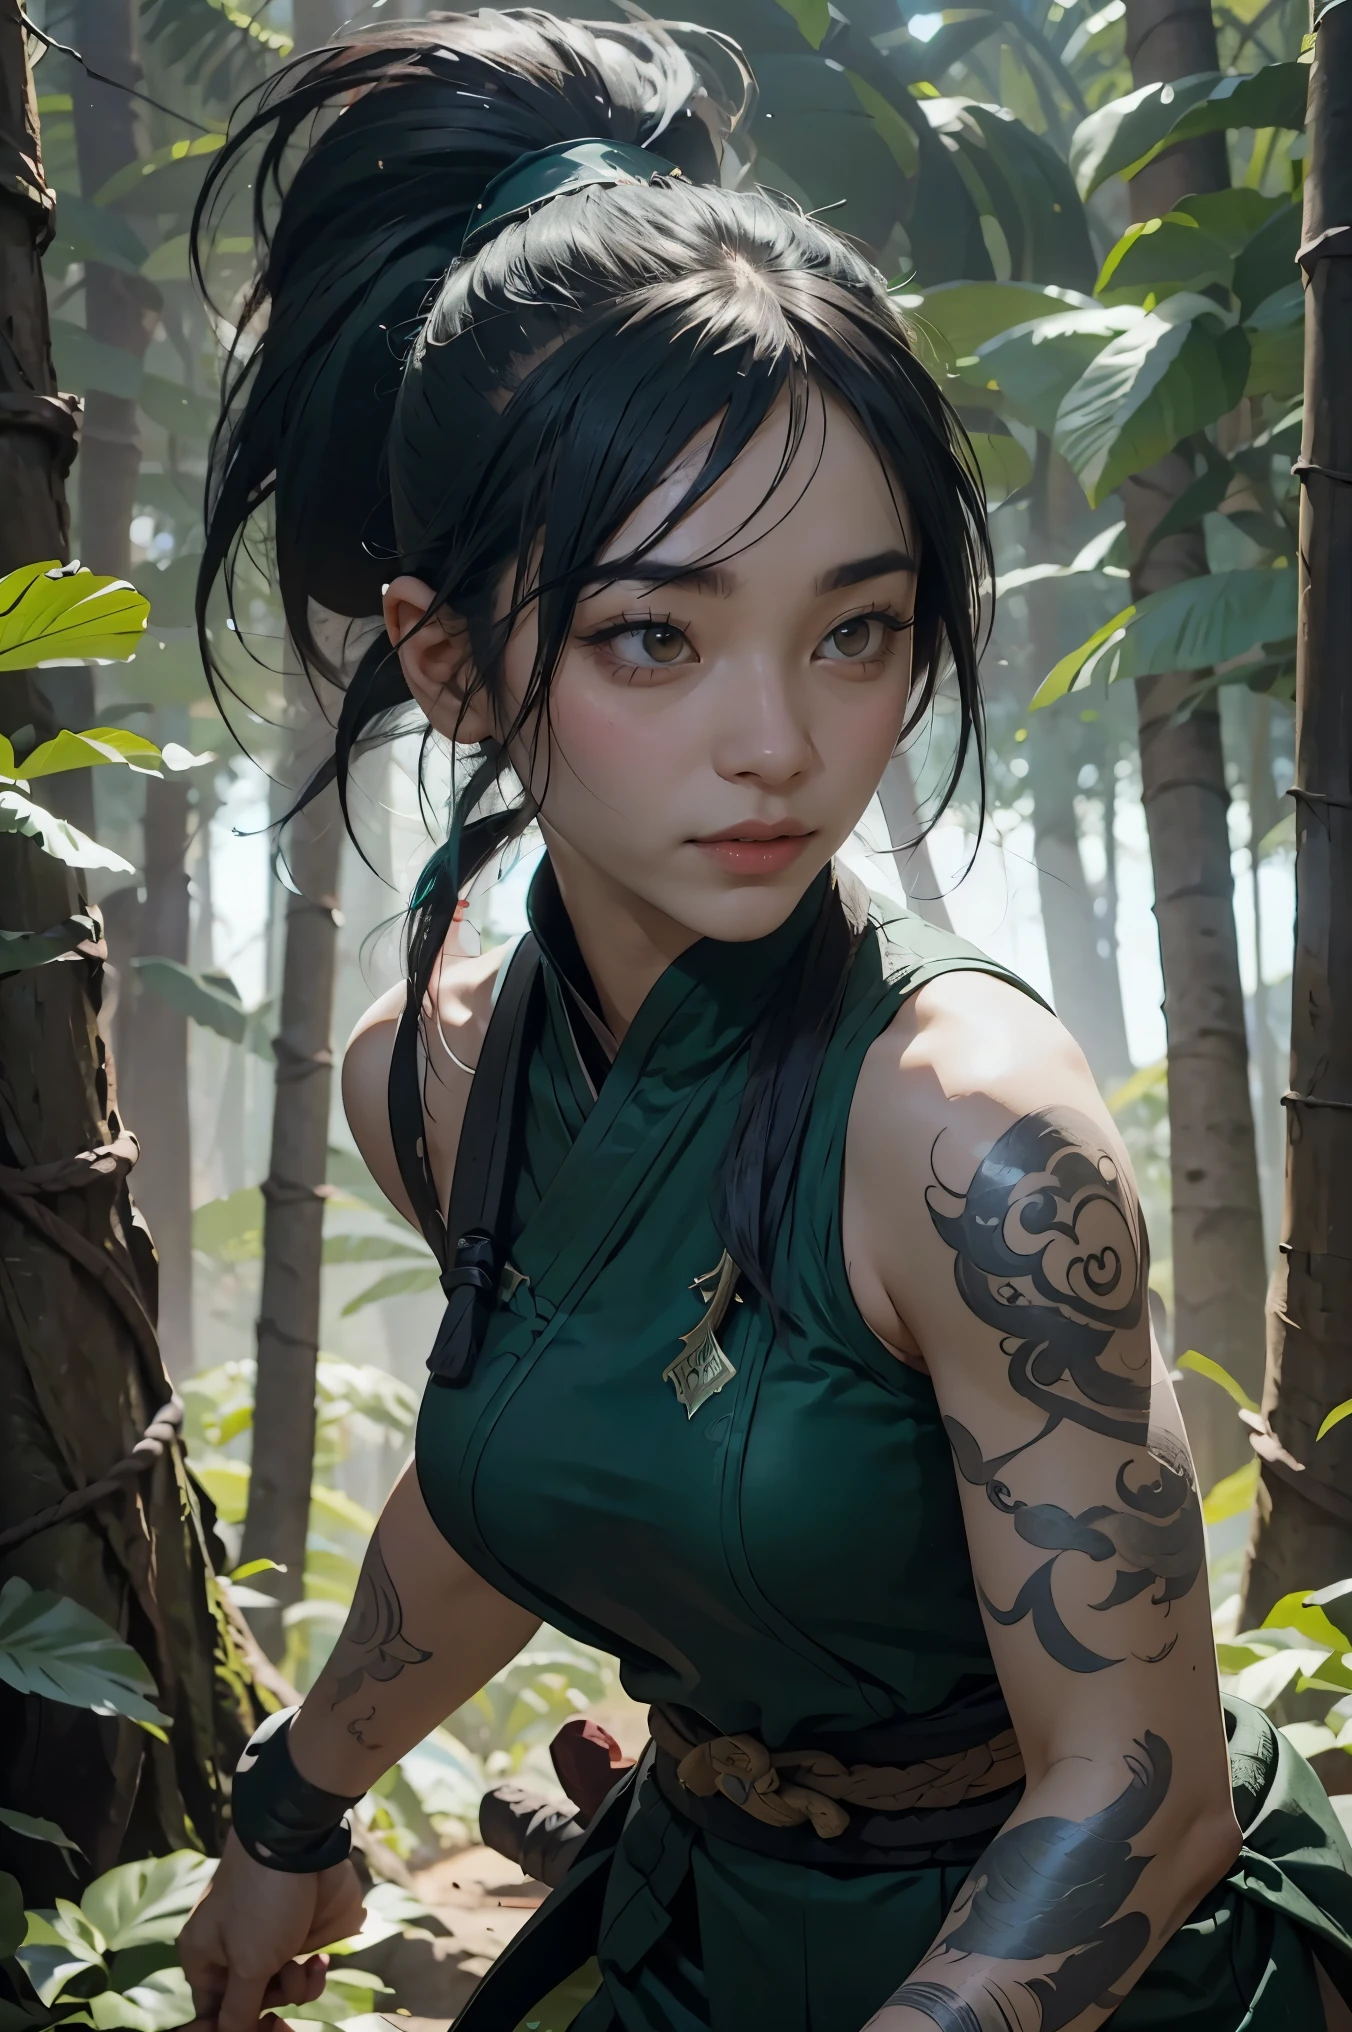 Akali shoulder tattoo in League of Legends，one person，wallpaper，Background in the forest，Game character design，high ponytail，Super light sense，female ninja。